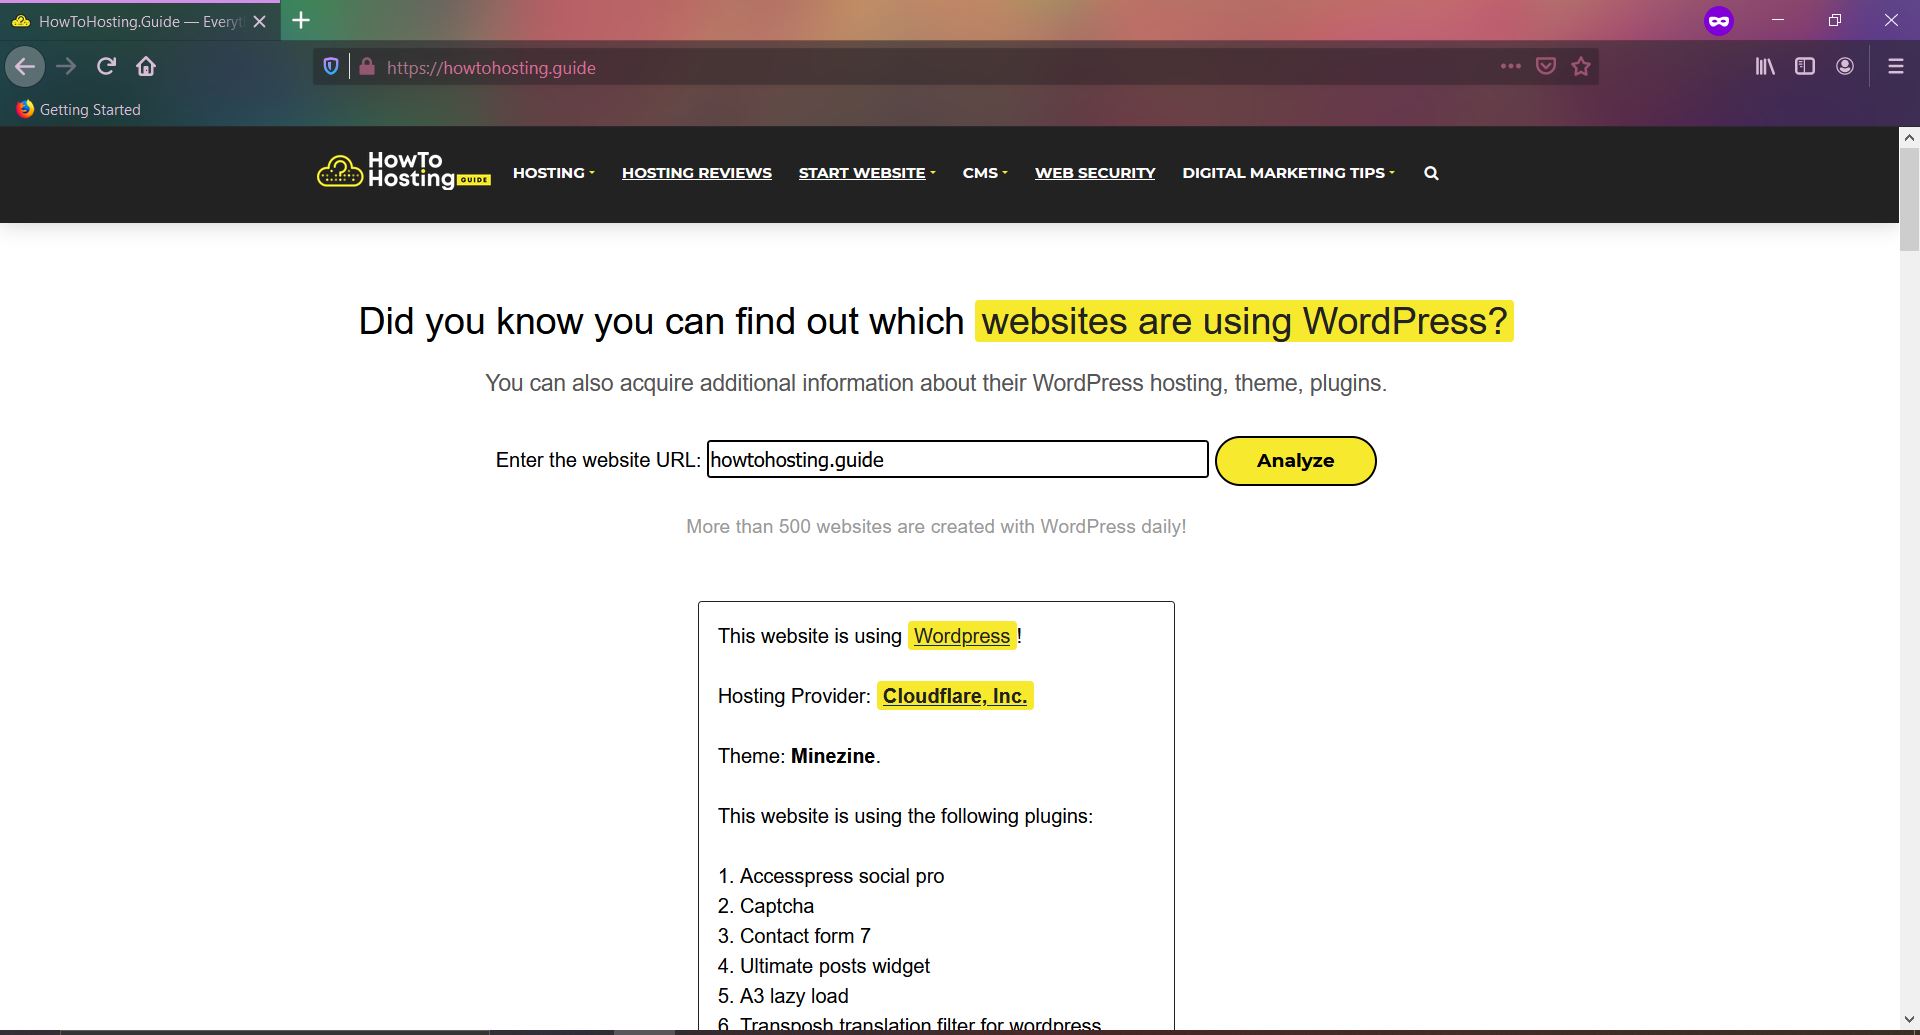 howtohosting-guide-tool-for-wordpress-site-theme-hosting-plugins-check